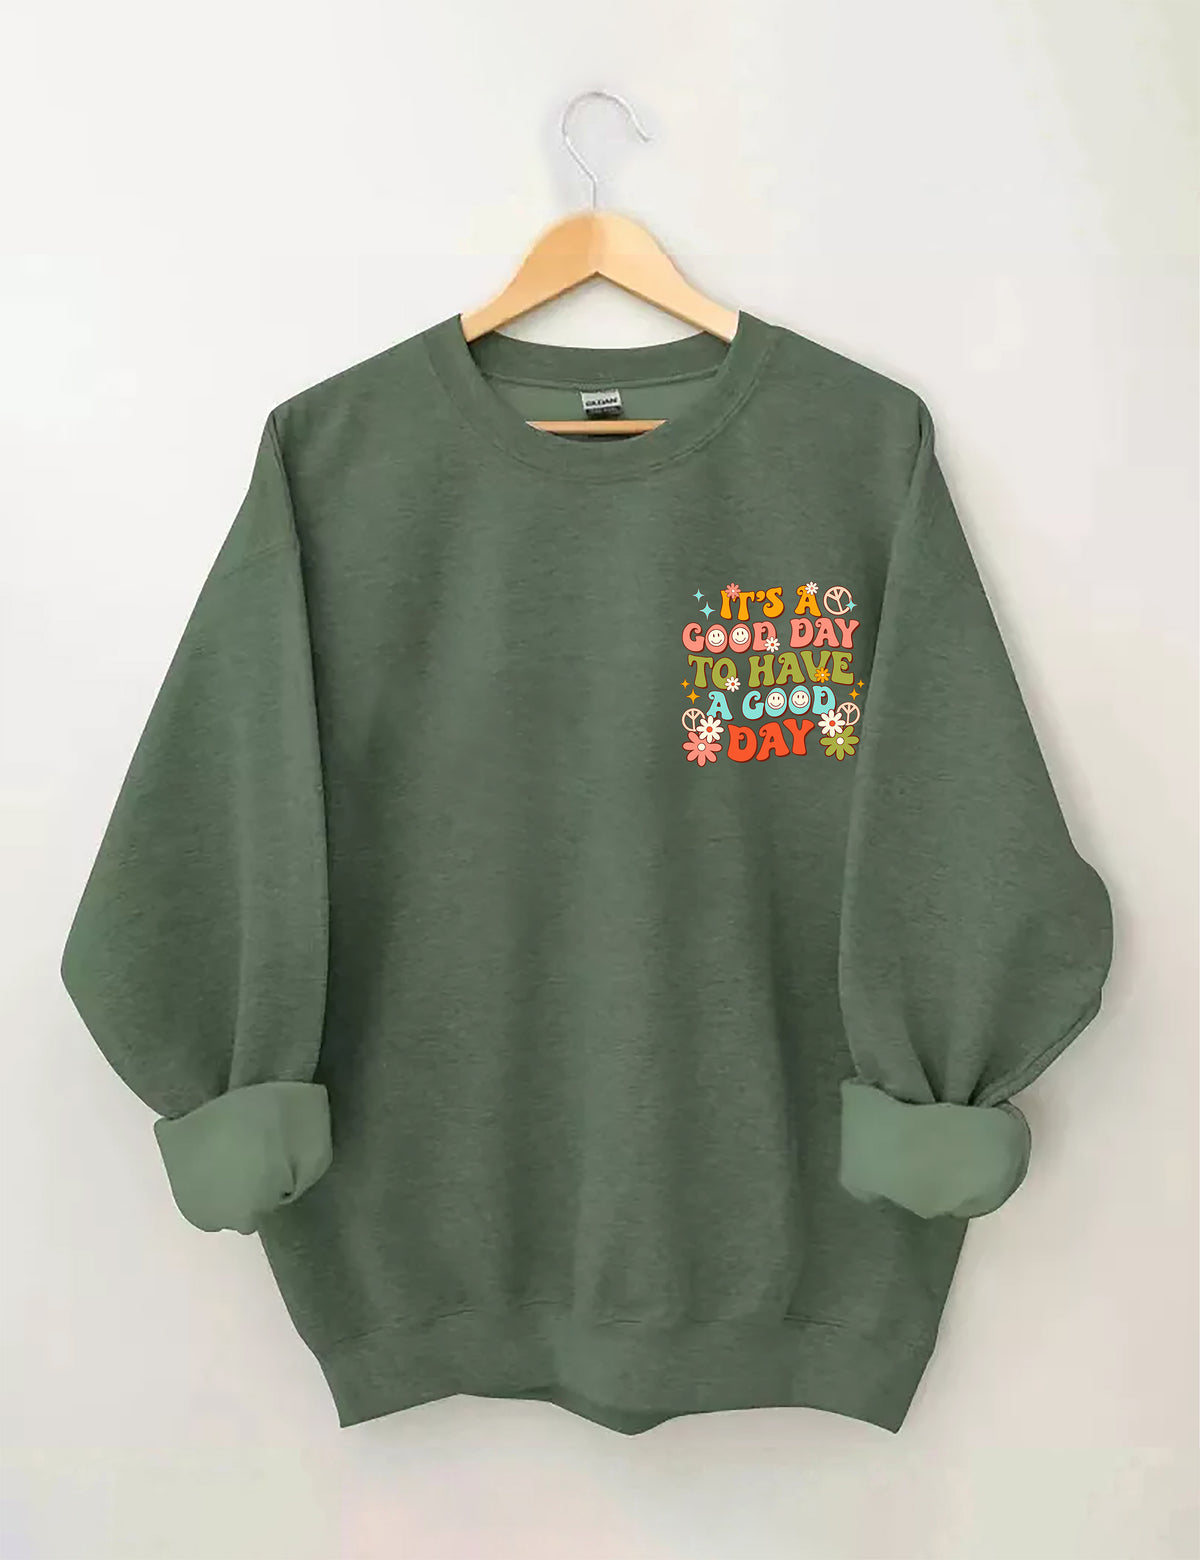 It's a Good Day To Have a Good Day Sweatshirt